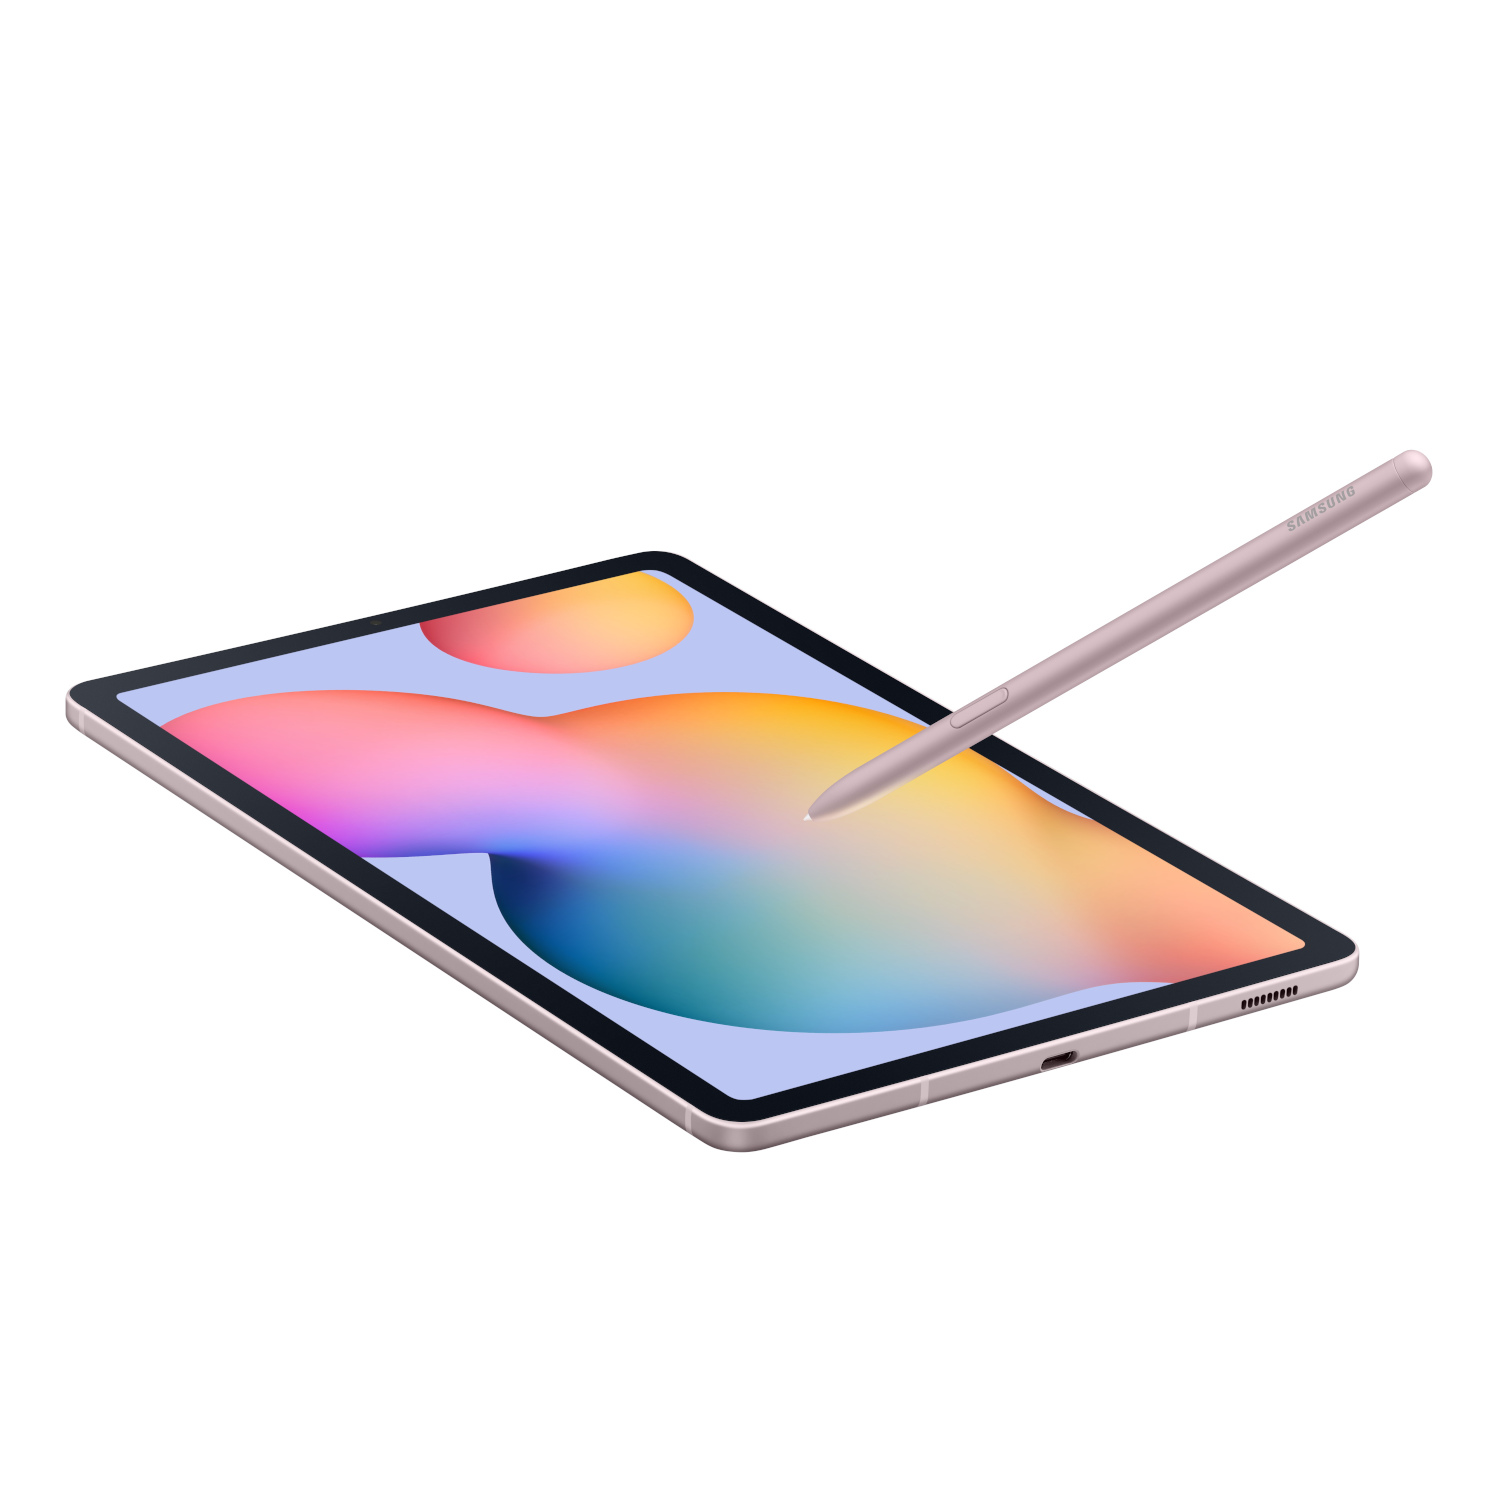 Galaxy Tab S6 to get 5G variant, will be first 5G tablet on the